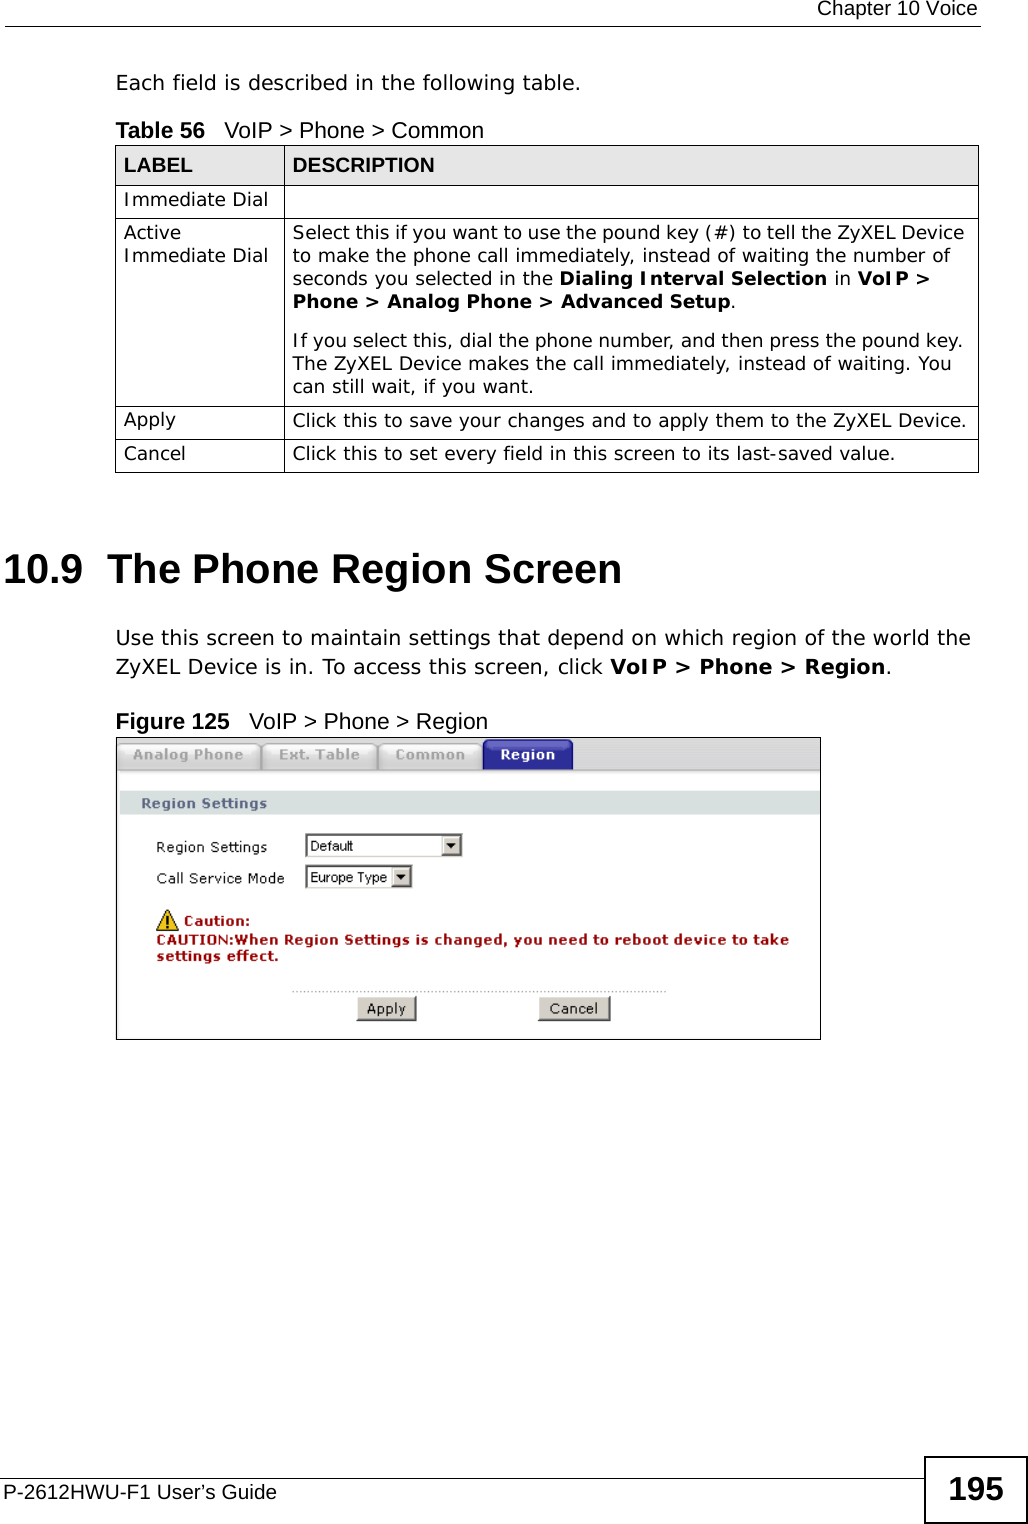  Chapter 10 VoiceP-2612HWU-F1 User’s Guide 195Each field is described in the following table.10.9  The Phone Region Screen Use this screen to maintain settings that depend on which region of the world the ZyXEL Device is in. To access this screen, click VoIP &gt; Phone &gt; Region.Figure 125   VoIP &gt; Phone &gt; RegionTable 56   VoIP &gt; Phone &gt; CommonLABEL DESCRIPTIONImmediate DialActive Immediate Dial Select this if you want to use the pound key (#) to tell the ZyXEL Device to make the phone call immediately, instead of waiting the number of seconds you selected in the Dialing Interval Selection in VoIP &gt; Phone &gt; Analog Phone &gt; Advanced Setup.If you select this, dial the phone number, and then press the pound key. The ZyXEL Device makes the call immediately, instead of waiting. You can still wait, if you want.Apply Click this to save your changes and to apply them to the ZyXEL Device.Cancel Click this to set every field in this screen to its last-saved value.